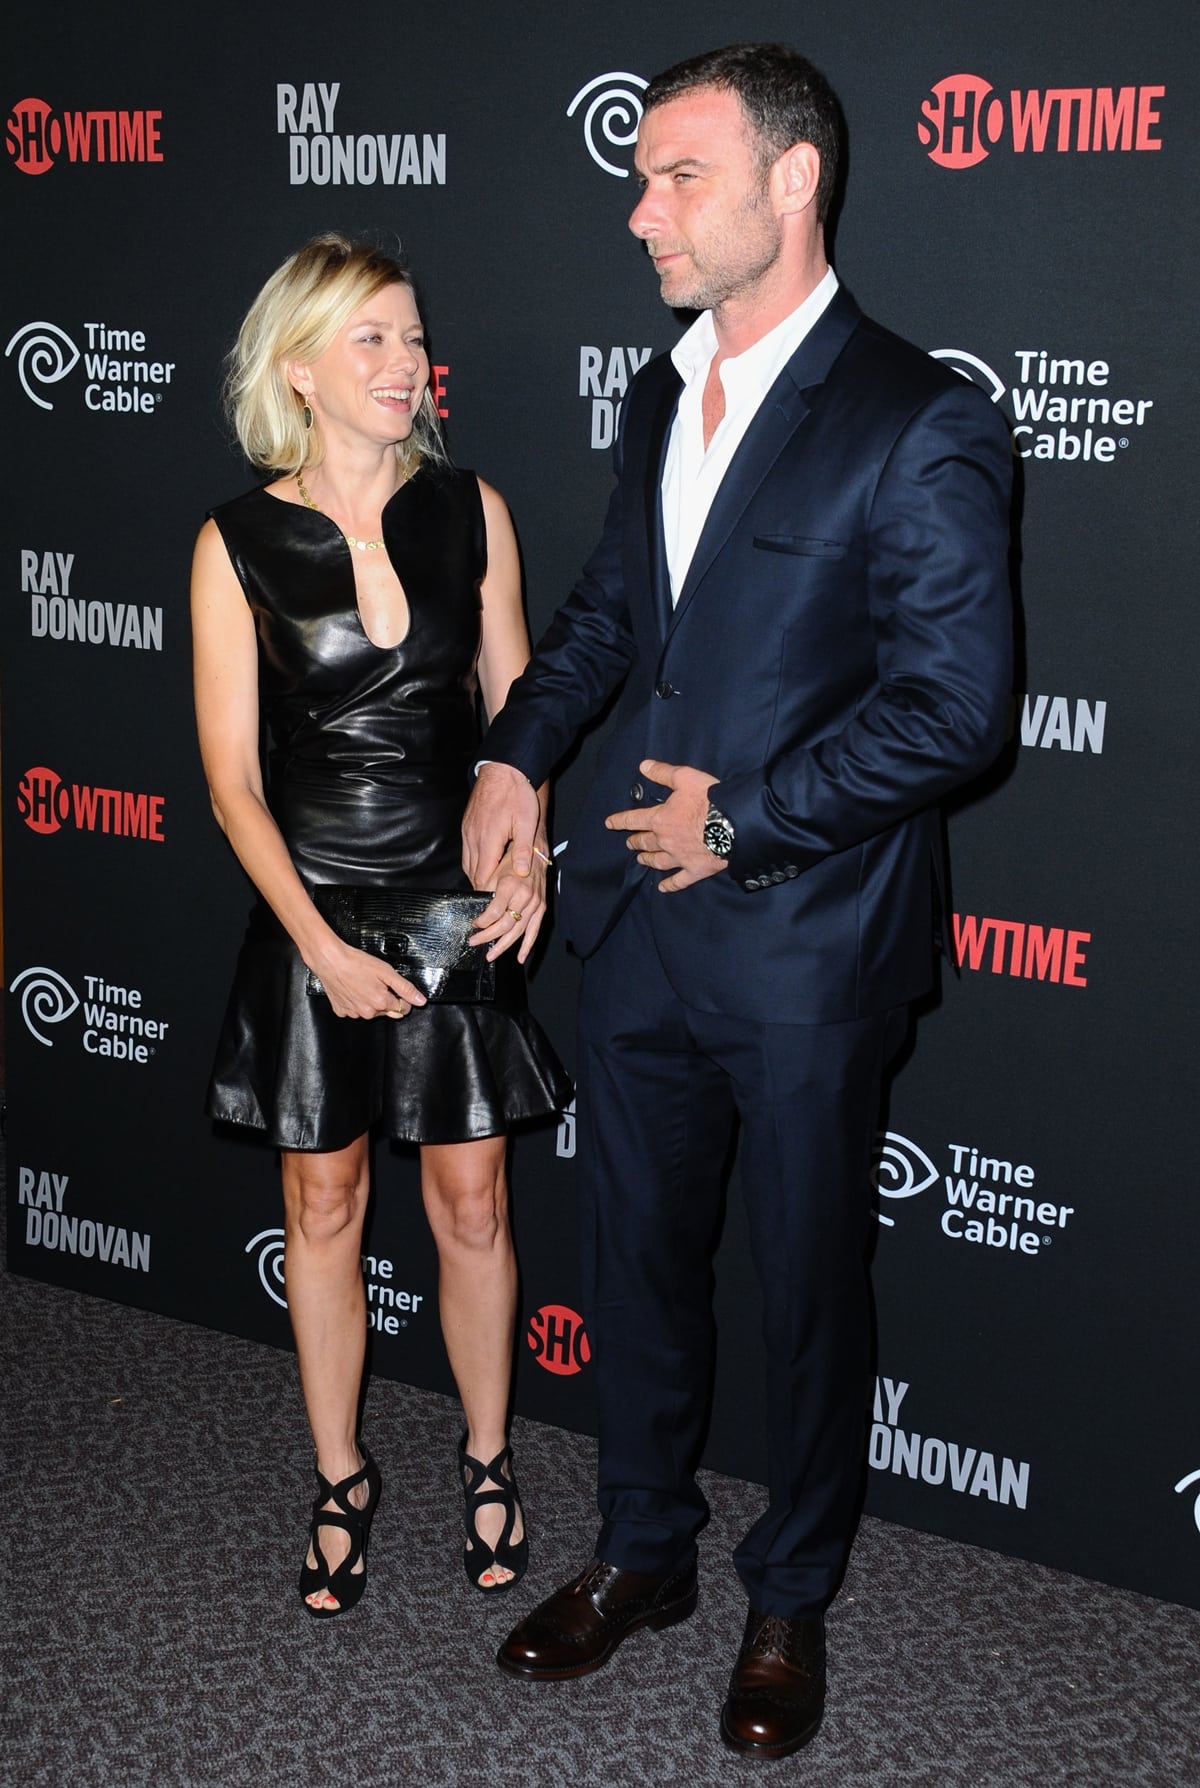 Naomi Watts and Liev Schreiber attended the premiere of 'Ray Donovan' in Los Angeles, with Schreiber in a midnight-blue suit and Watts in an Alexander McQueen leather dress